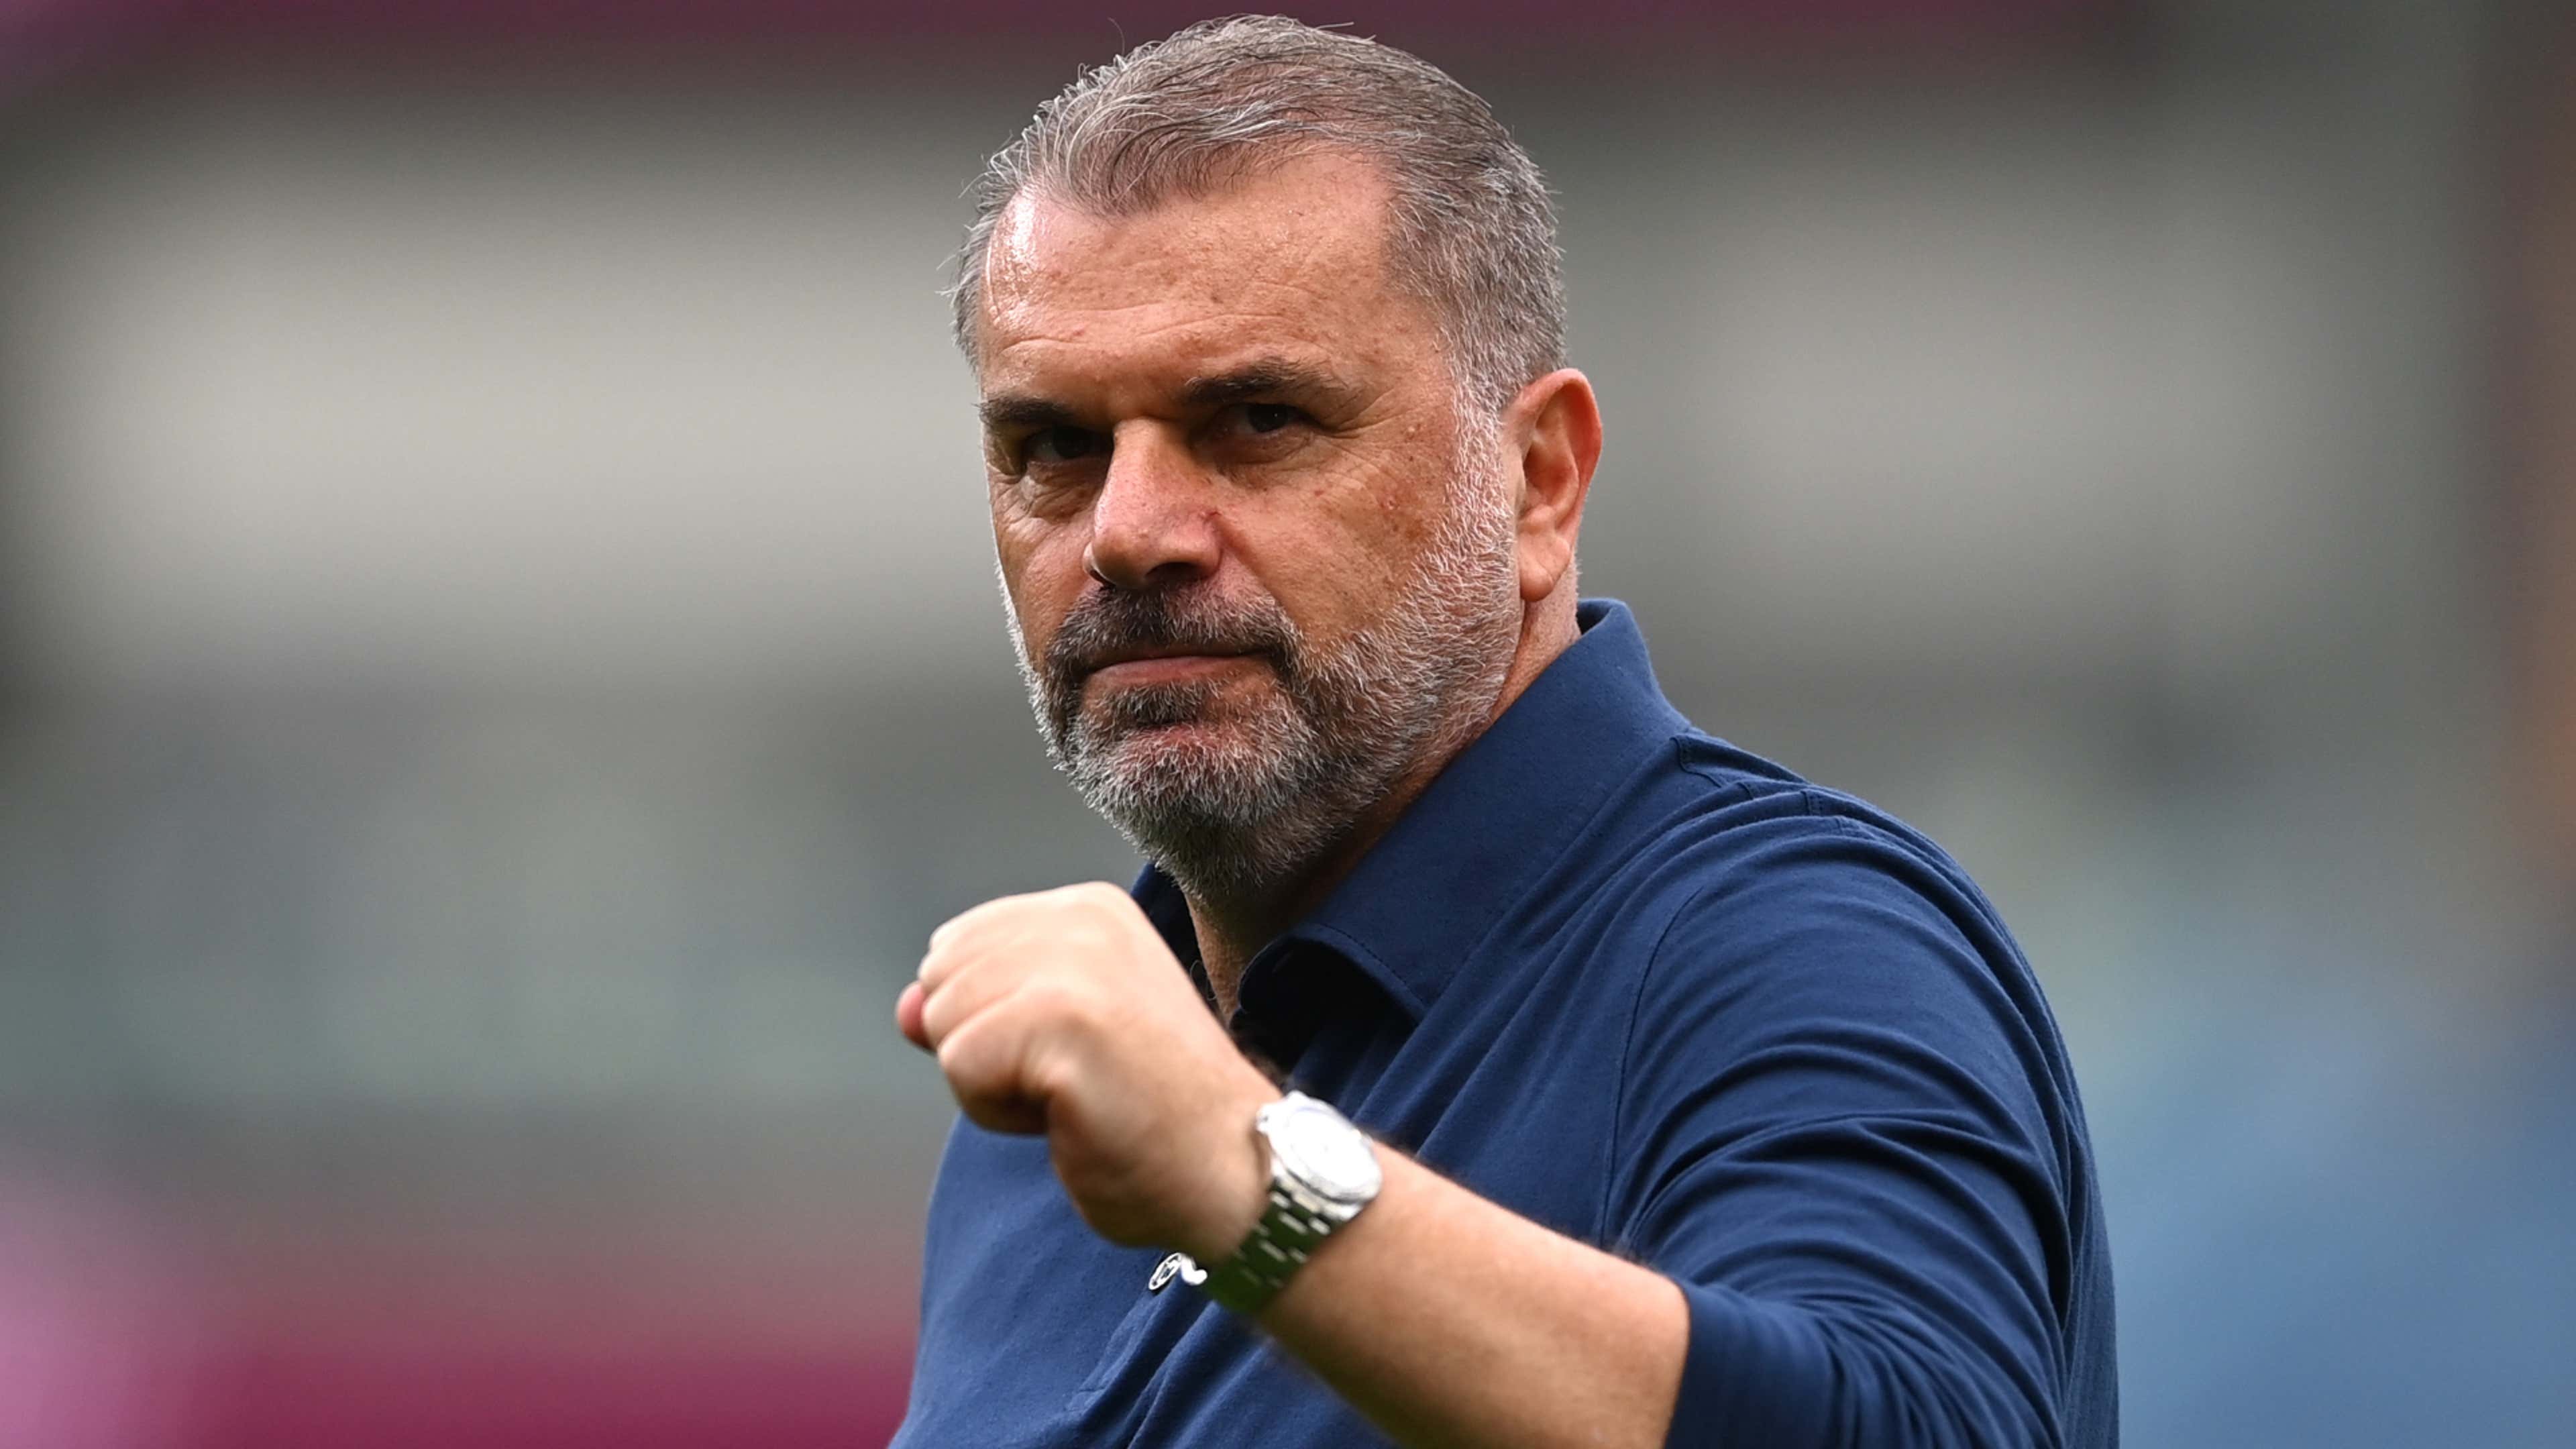 Oh, come on mate!' - Tottenham boss Ange Postecoglou's hilarious response  when asked if he could become England manager in future | Goal.com Nigeria